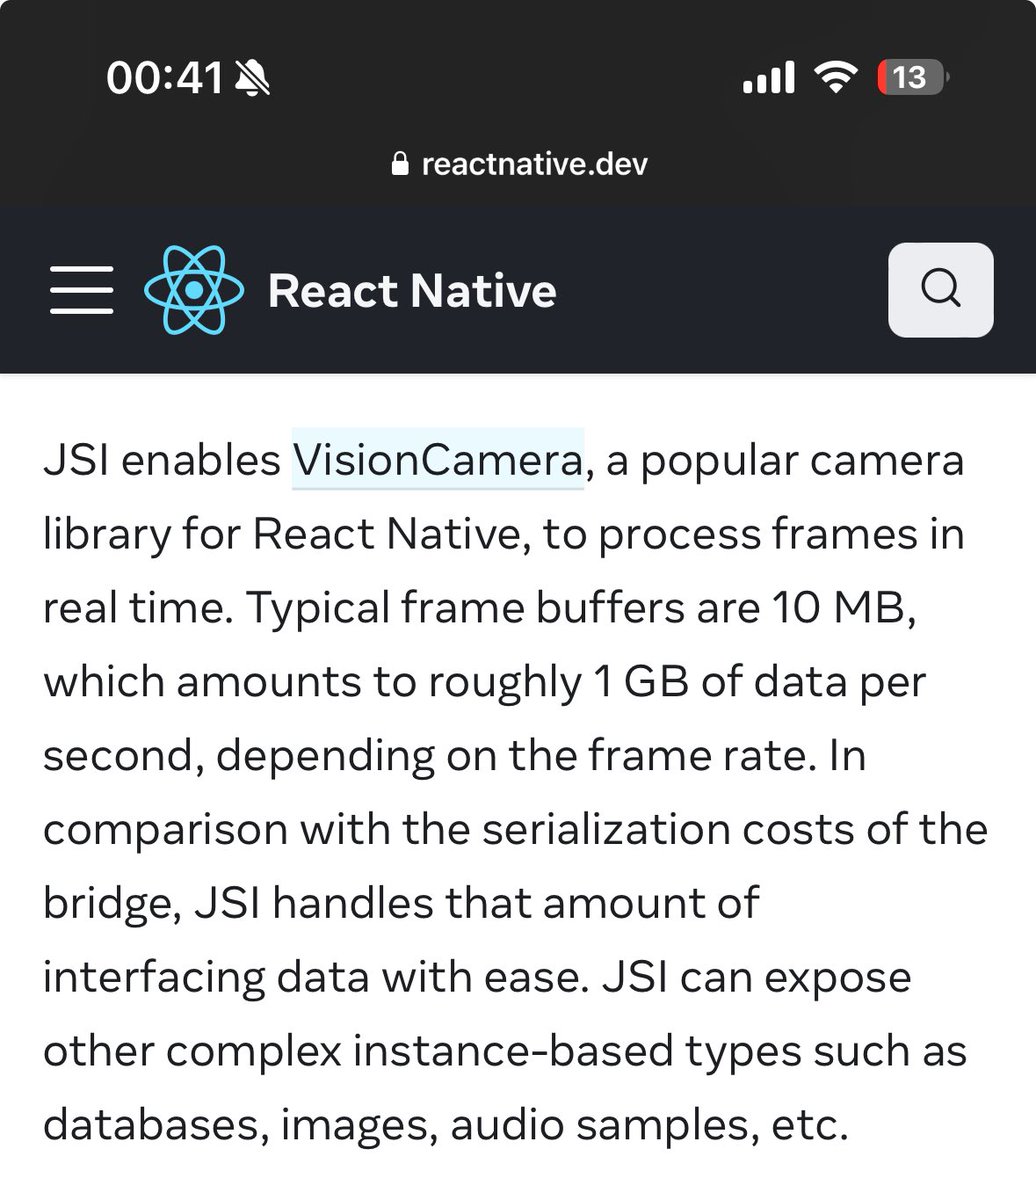 If you're still confused about the new architecture, check out this amazing guide on the react native website by @lunaleaps - they even mention react-native-vision-camera 🥰 reactnative.dev/docs/the-new-a…